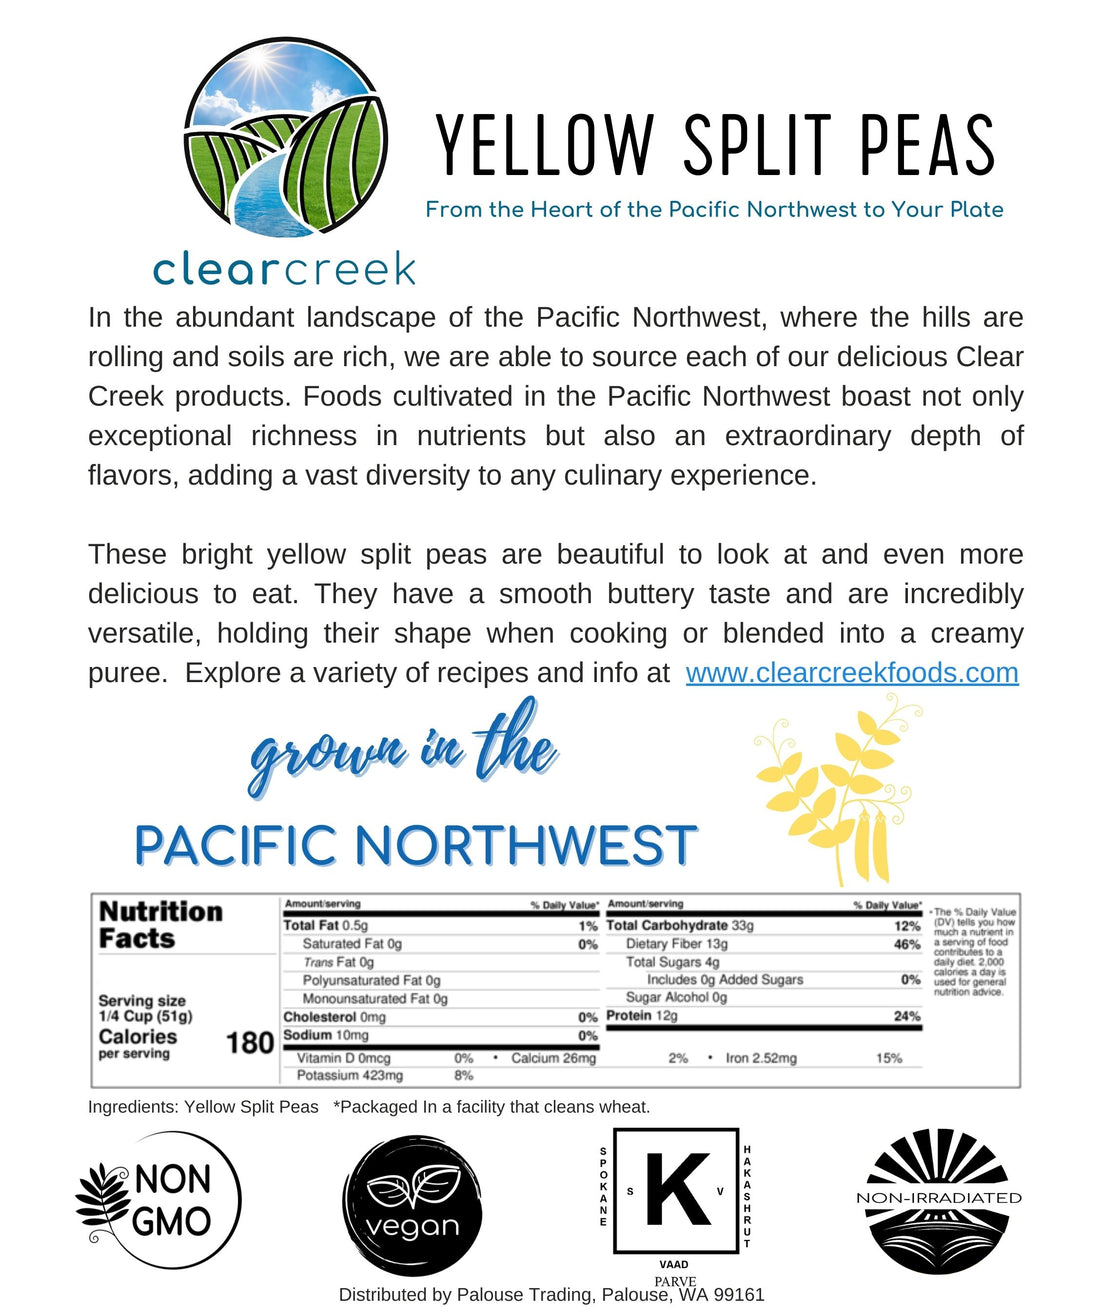 Nutrition Facts for Idaho Grown Yellow Split Peas